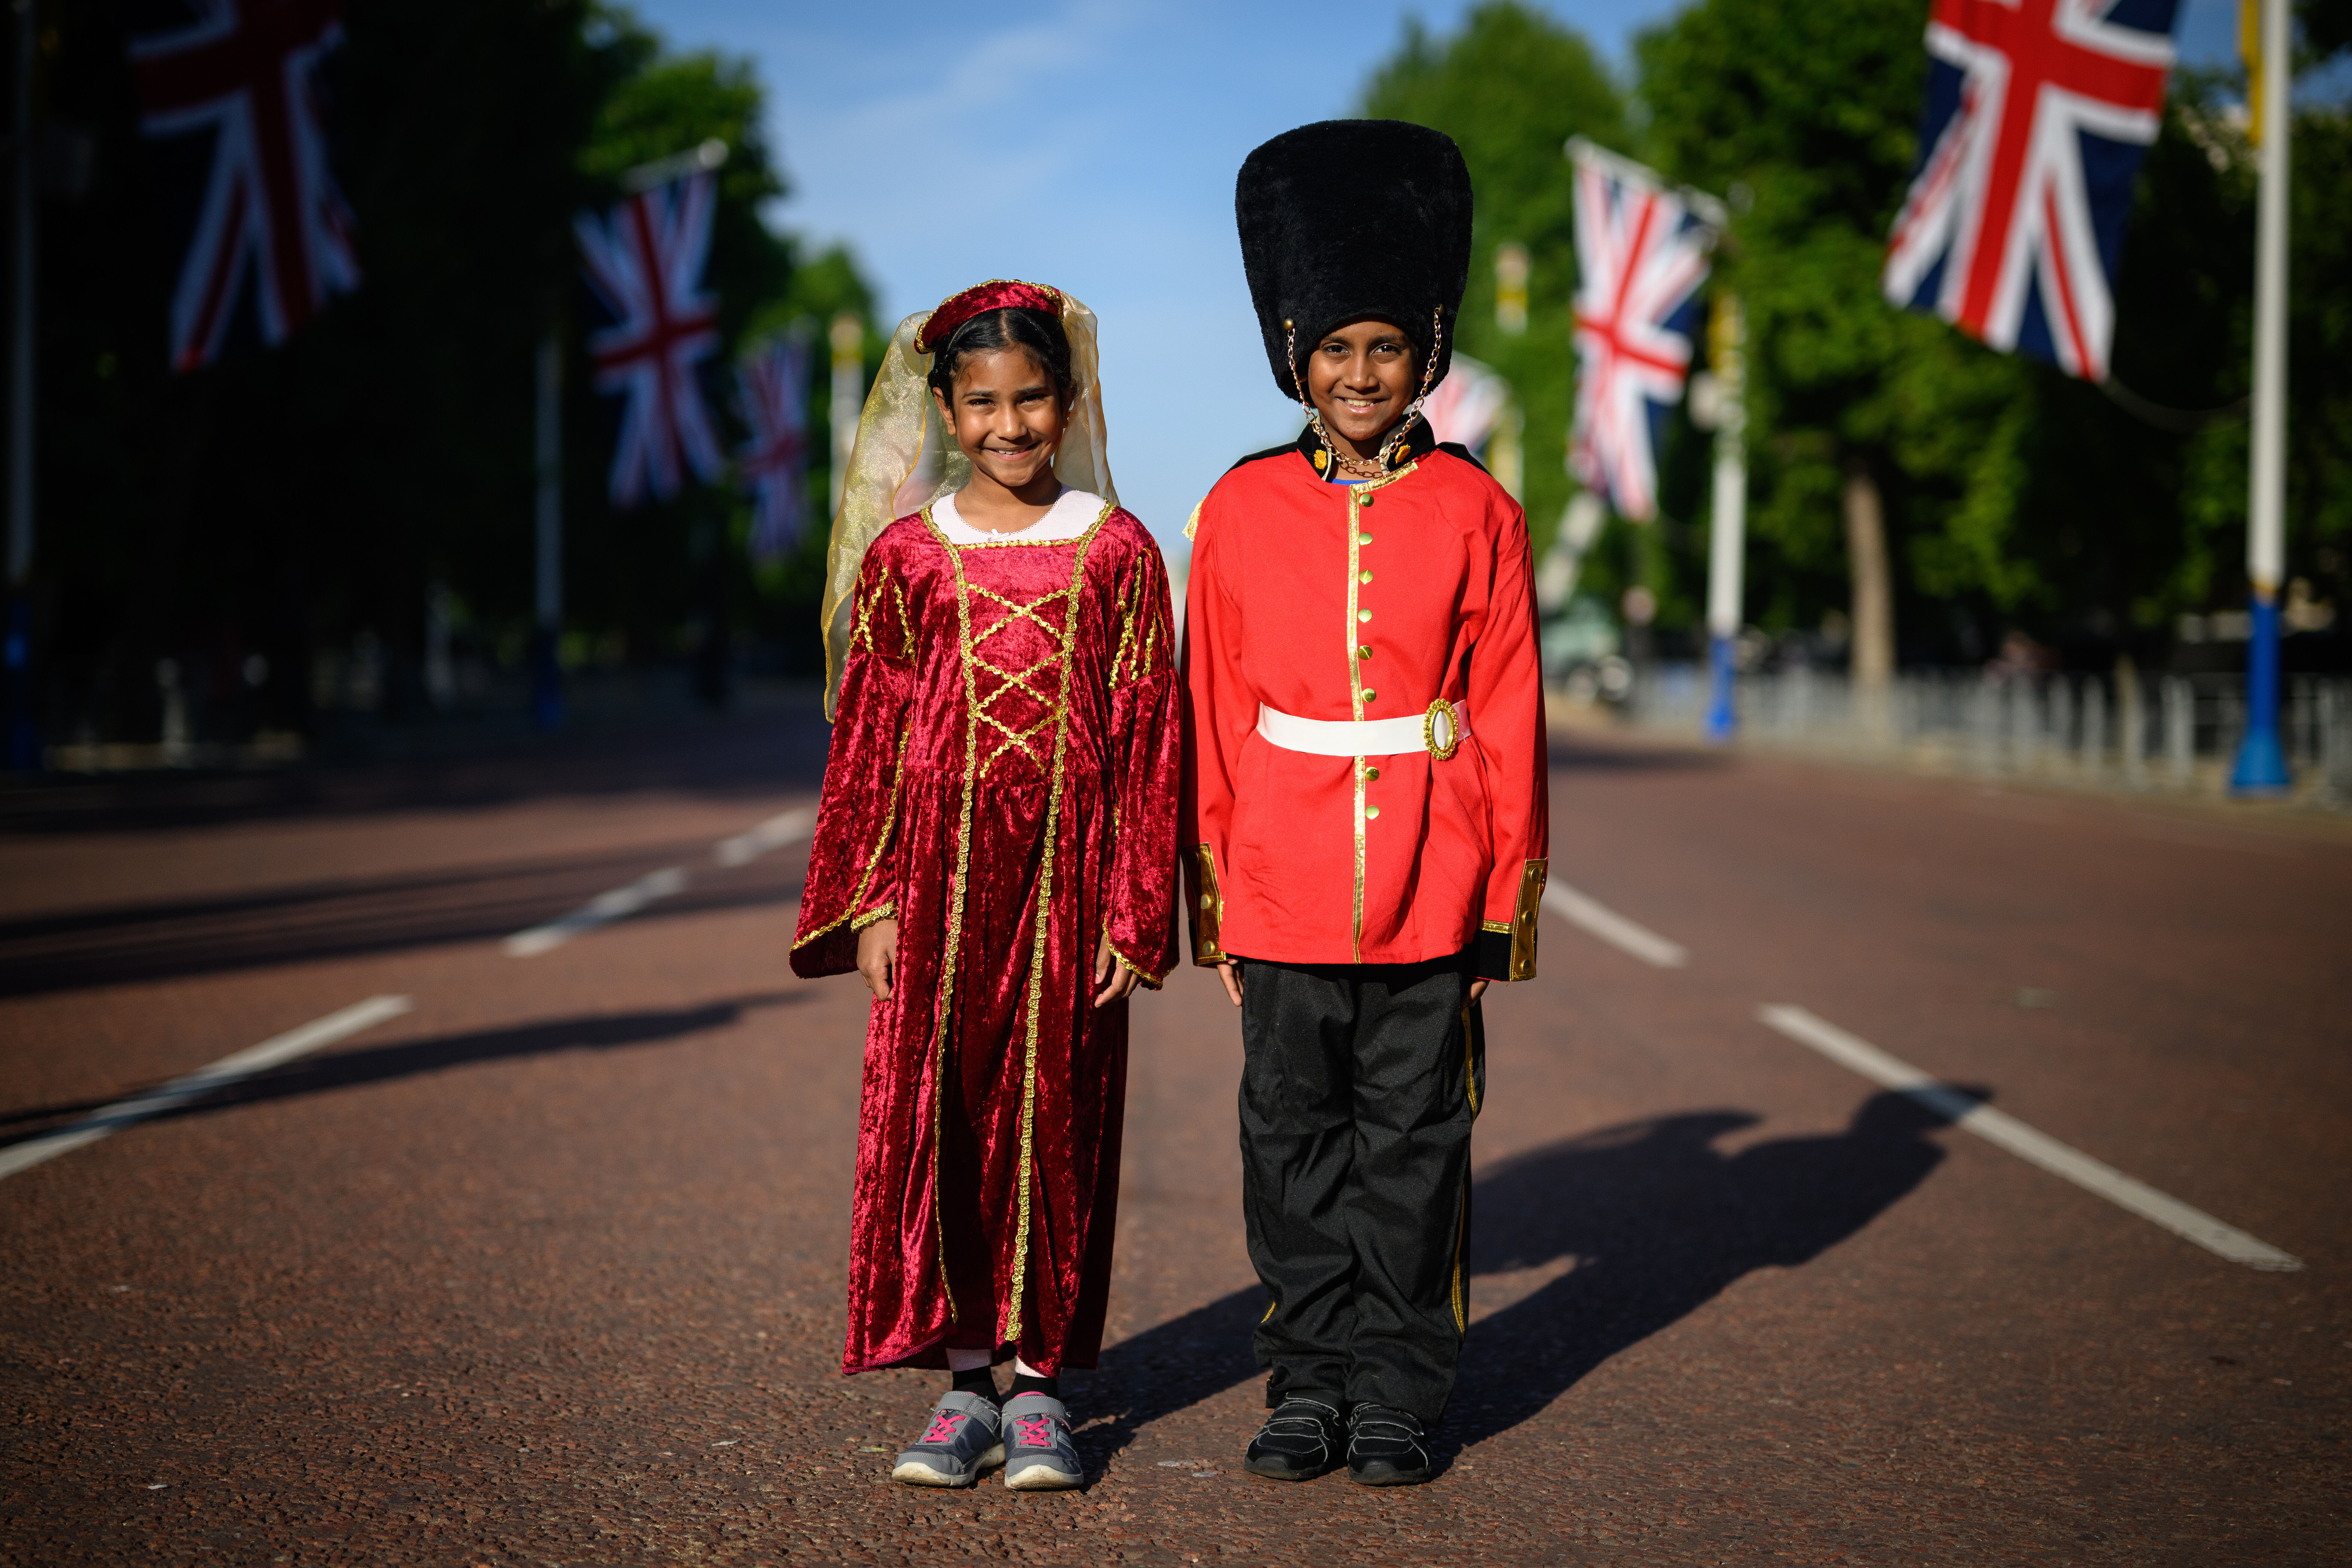 Pair of children wearing costumes as they arrive to celebrate the Platinum Jubilee of Queen Elizabeth II